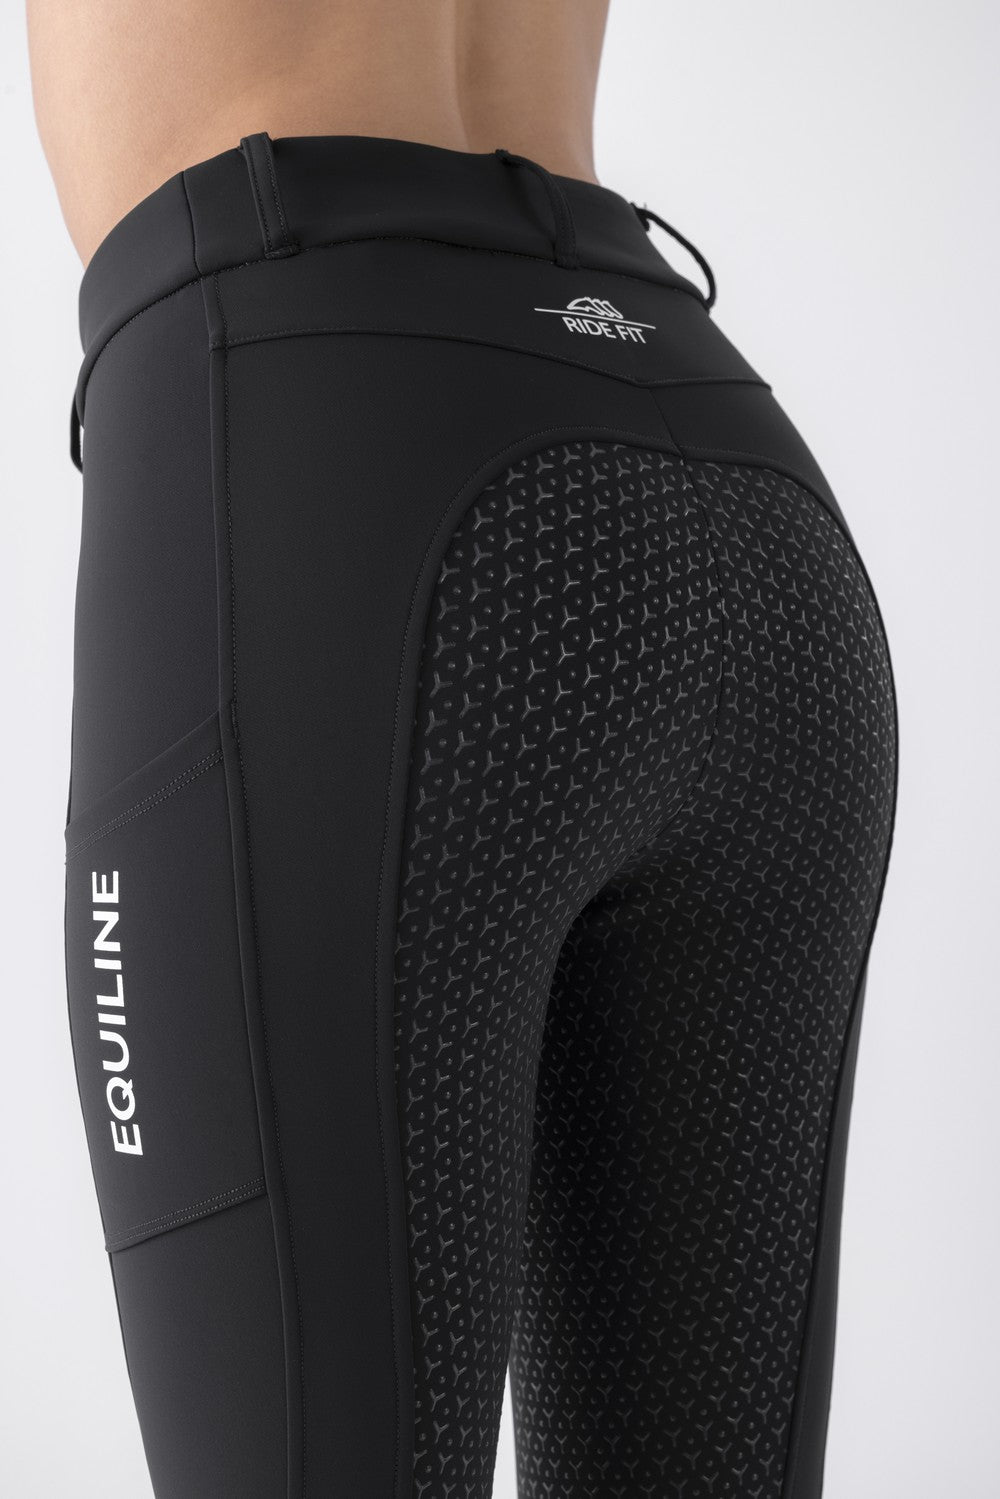 Equiline Pull on winter riding breeches full grip ladies Cirtef Black